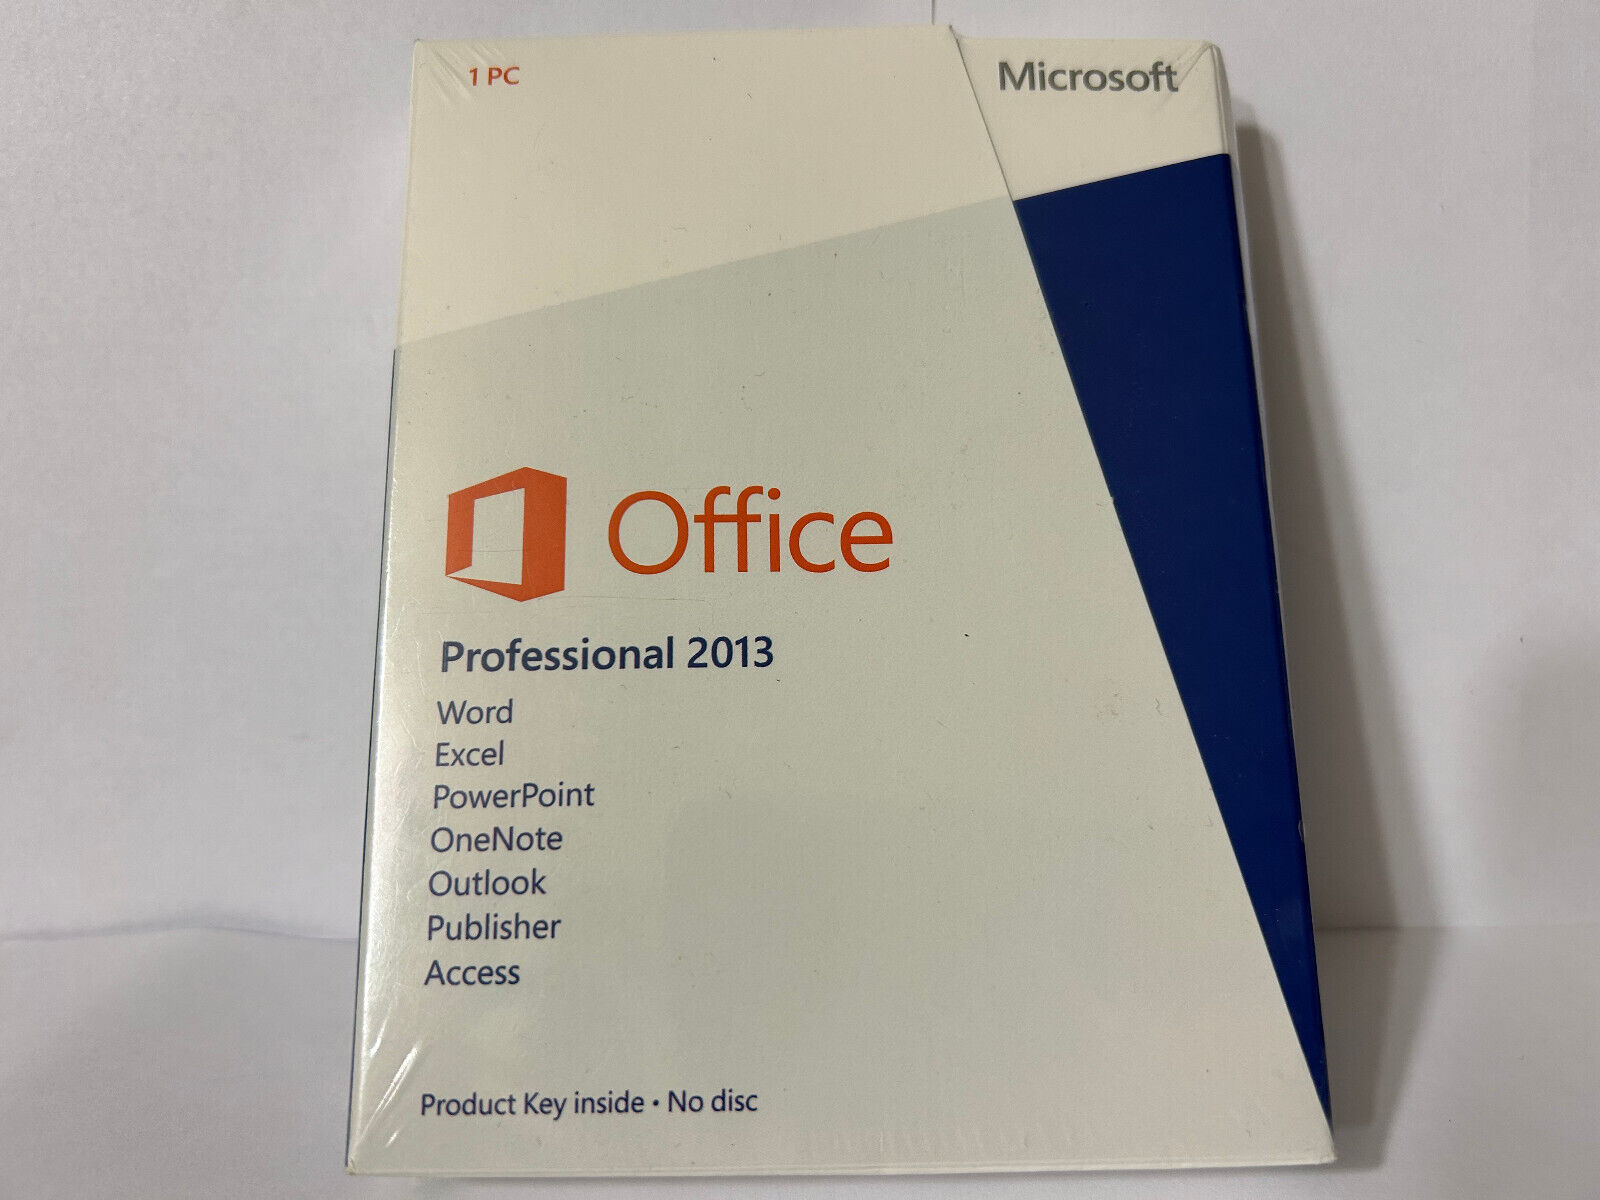 Microsoft Office Professional 2013 for 1 PC